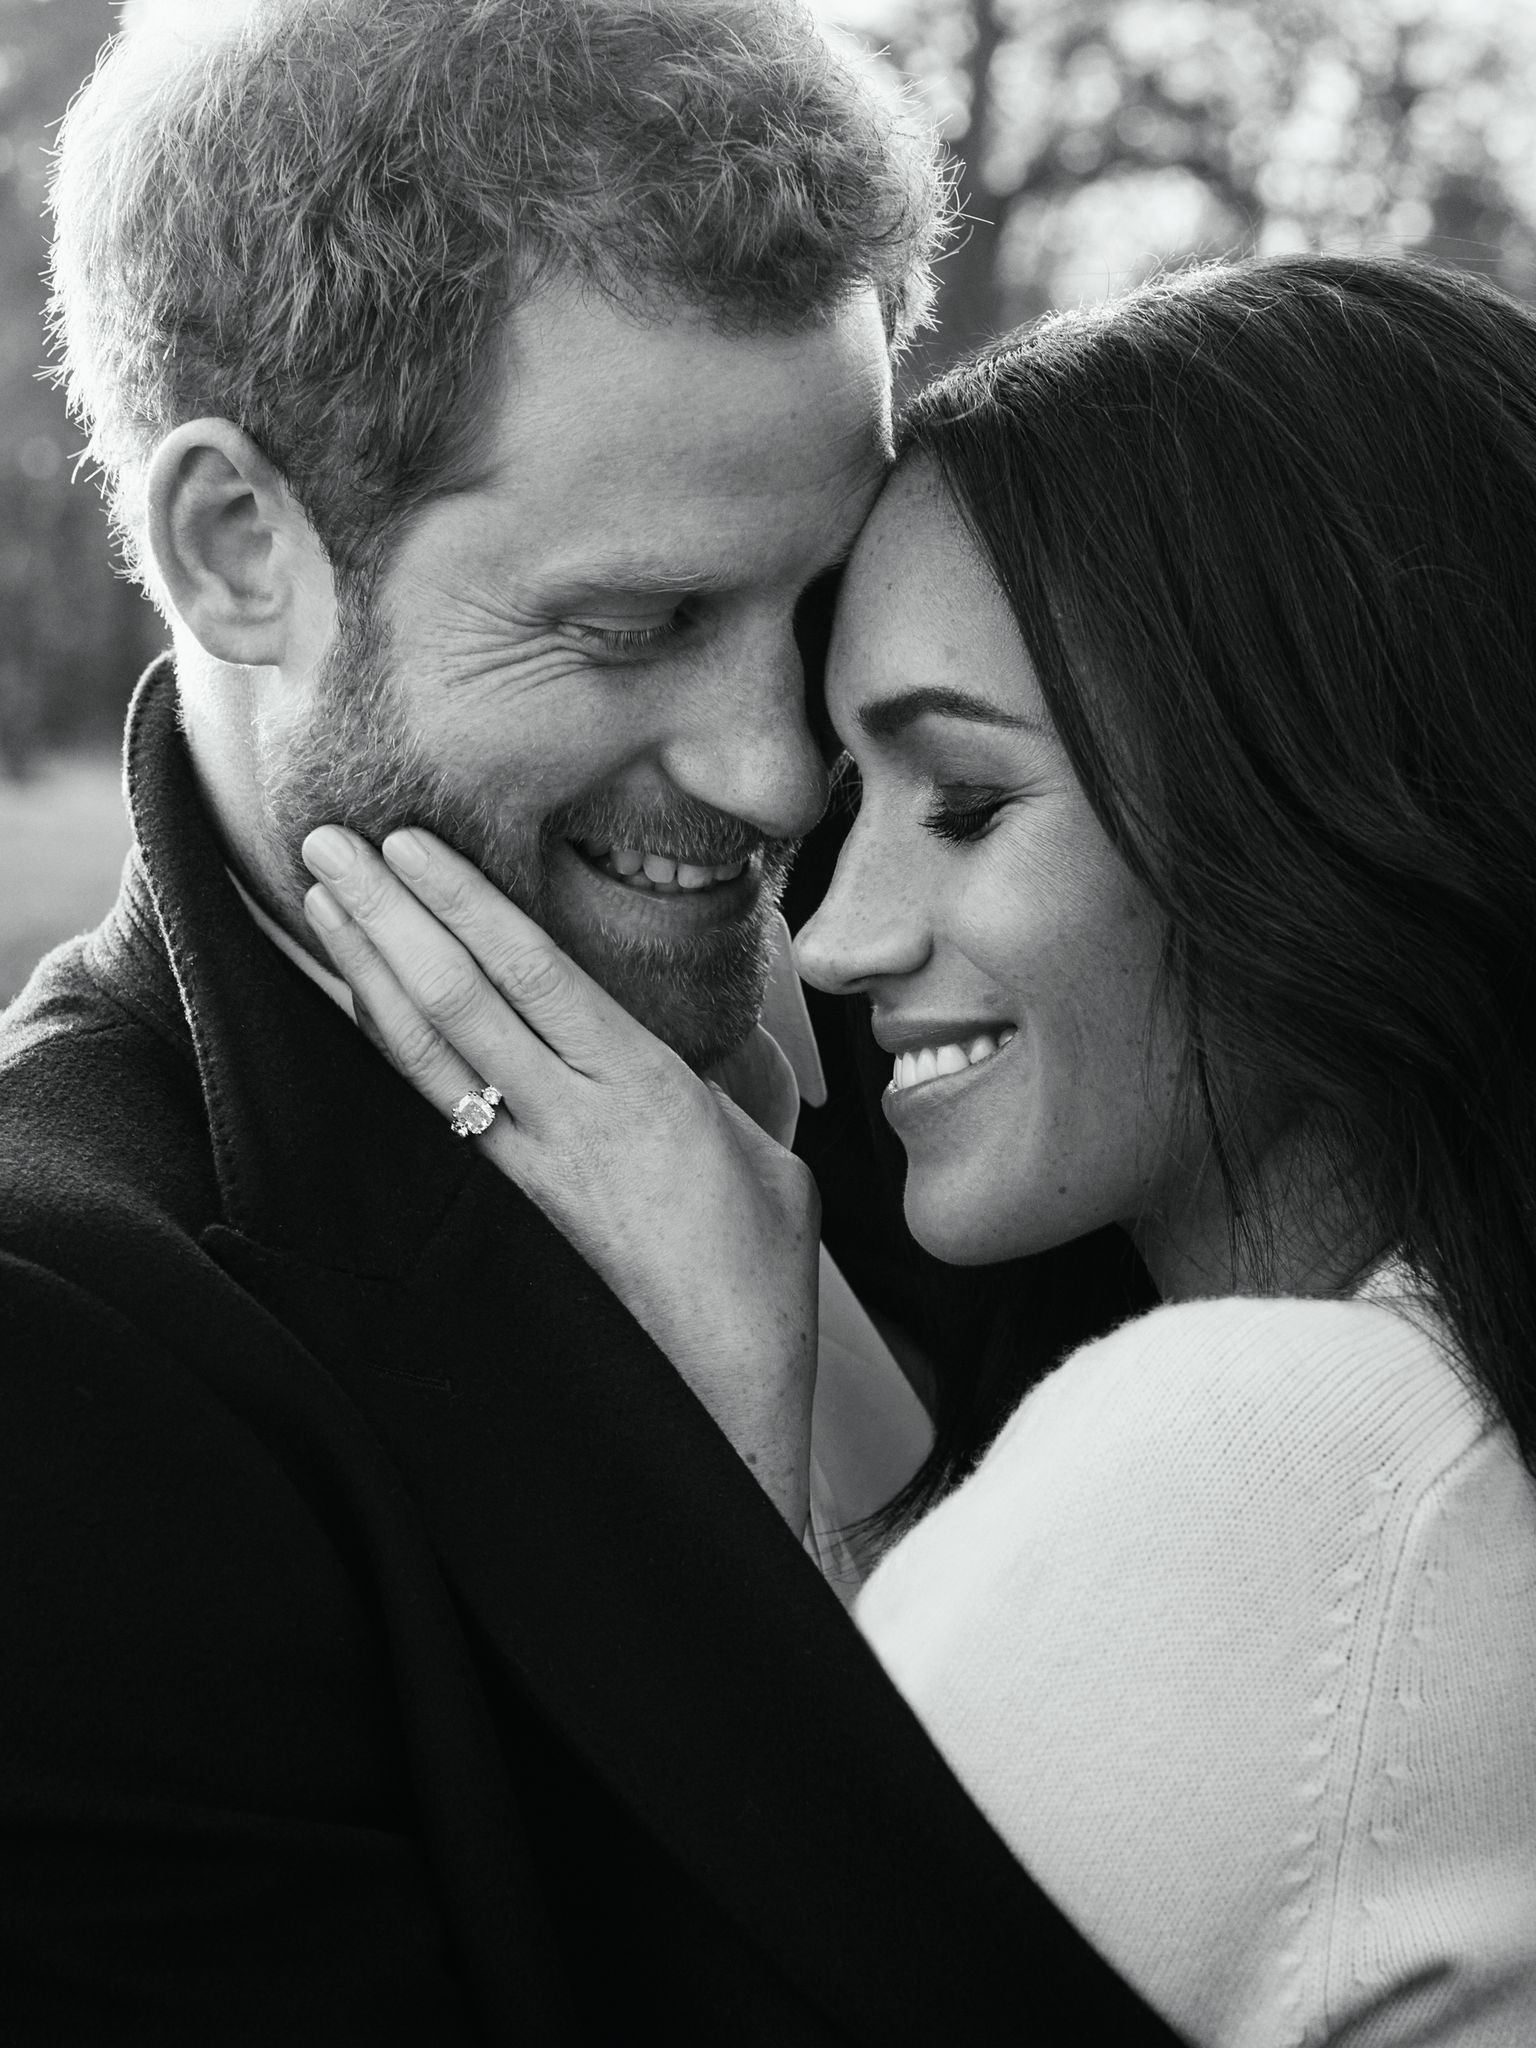 Prince Harry And Meghan Markle Engagement | Getty Images